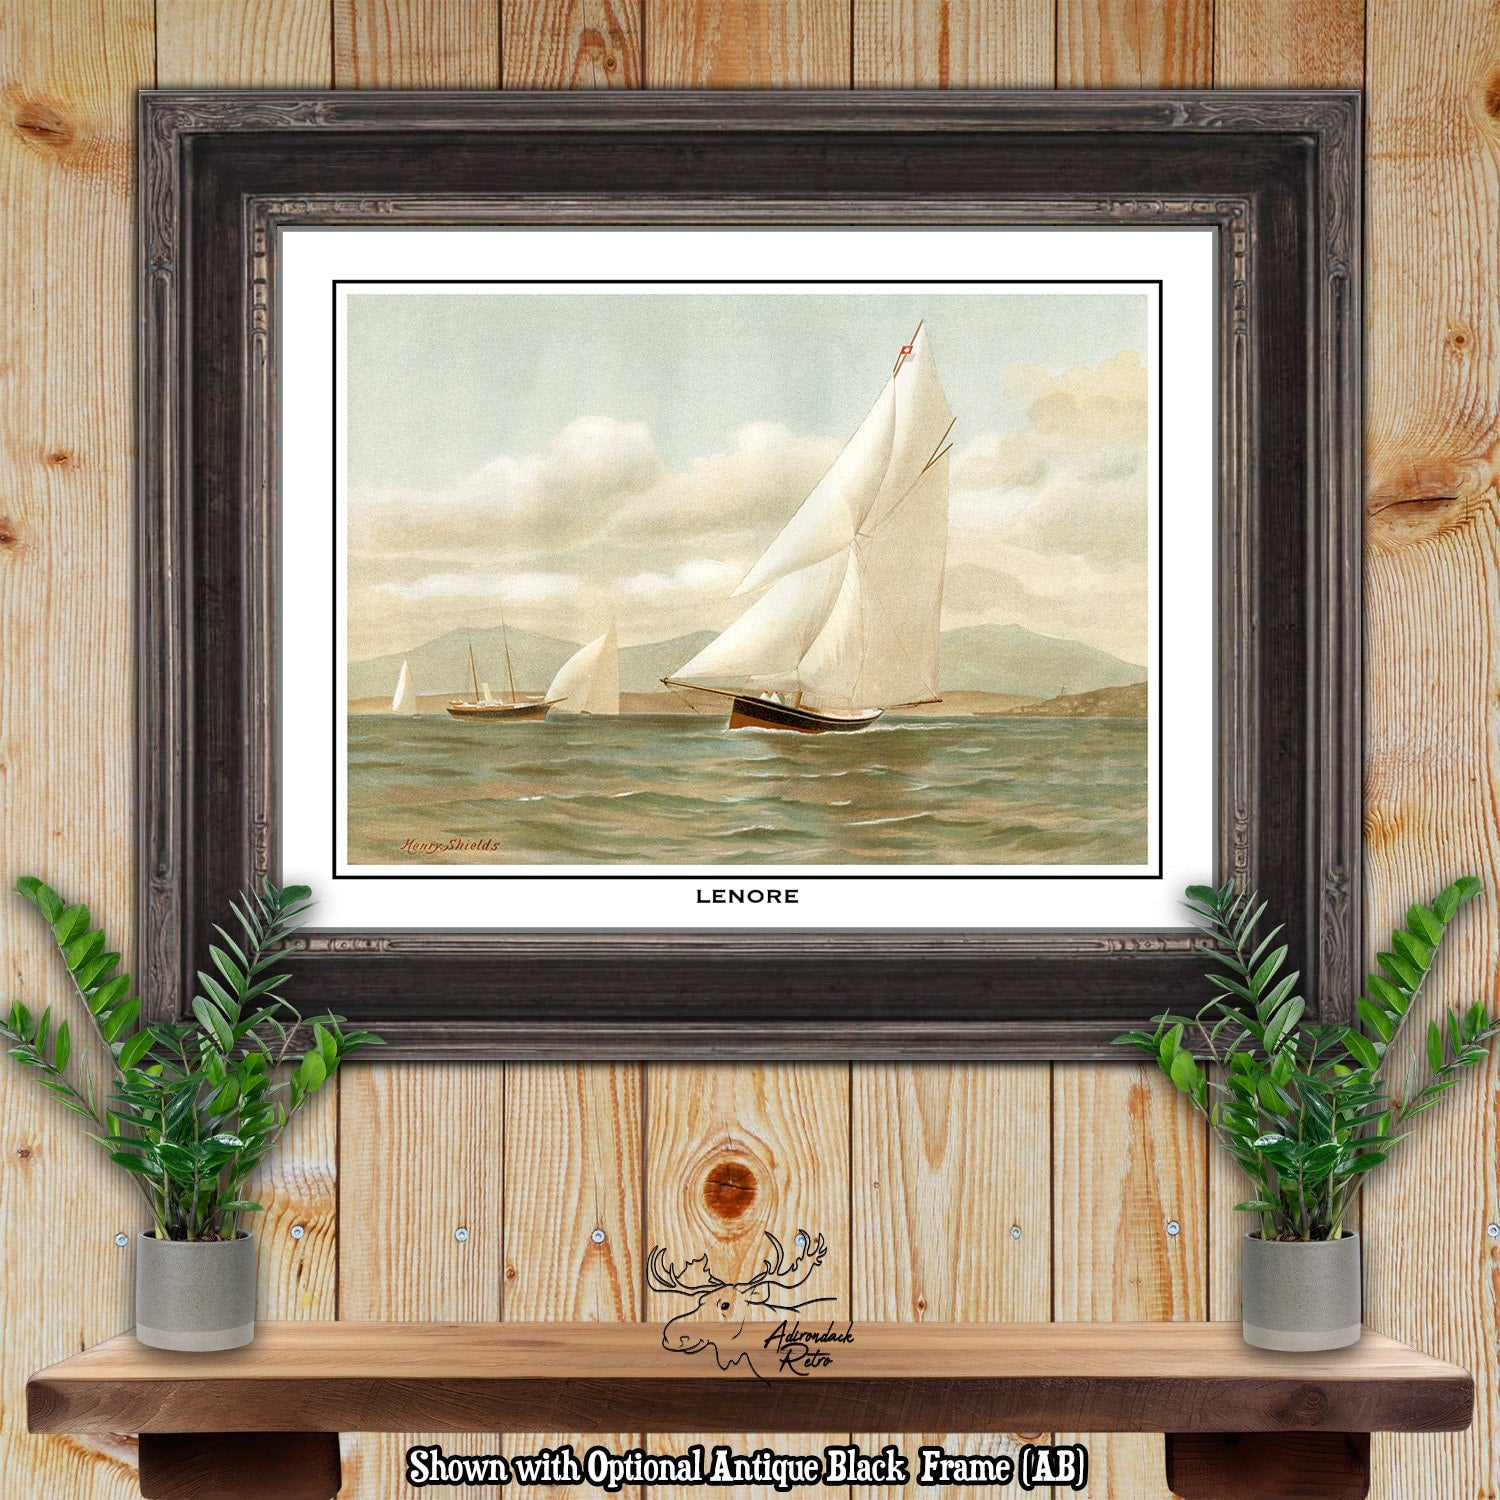 Clyde Yacht Lenore by Henry Shields Giclee Fine Art Print at Adirondack Retro